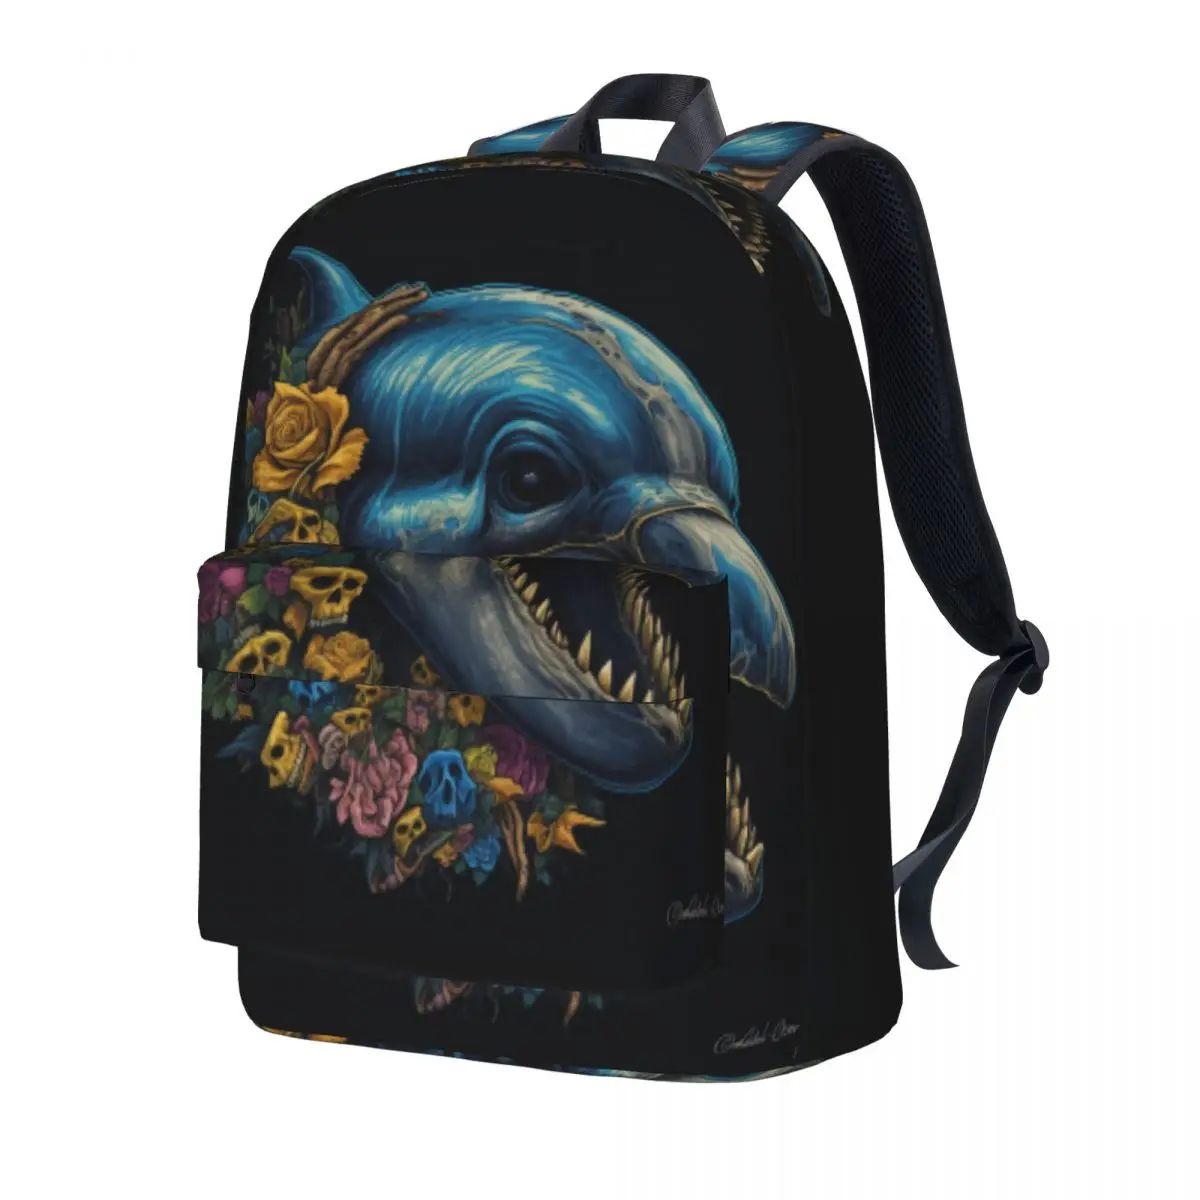 

Dolphin Backpack Zombie Portraits Comic Illustration Aesthetic Backpacks Men Travel Durable High School Bags Colorful Rucksack